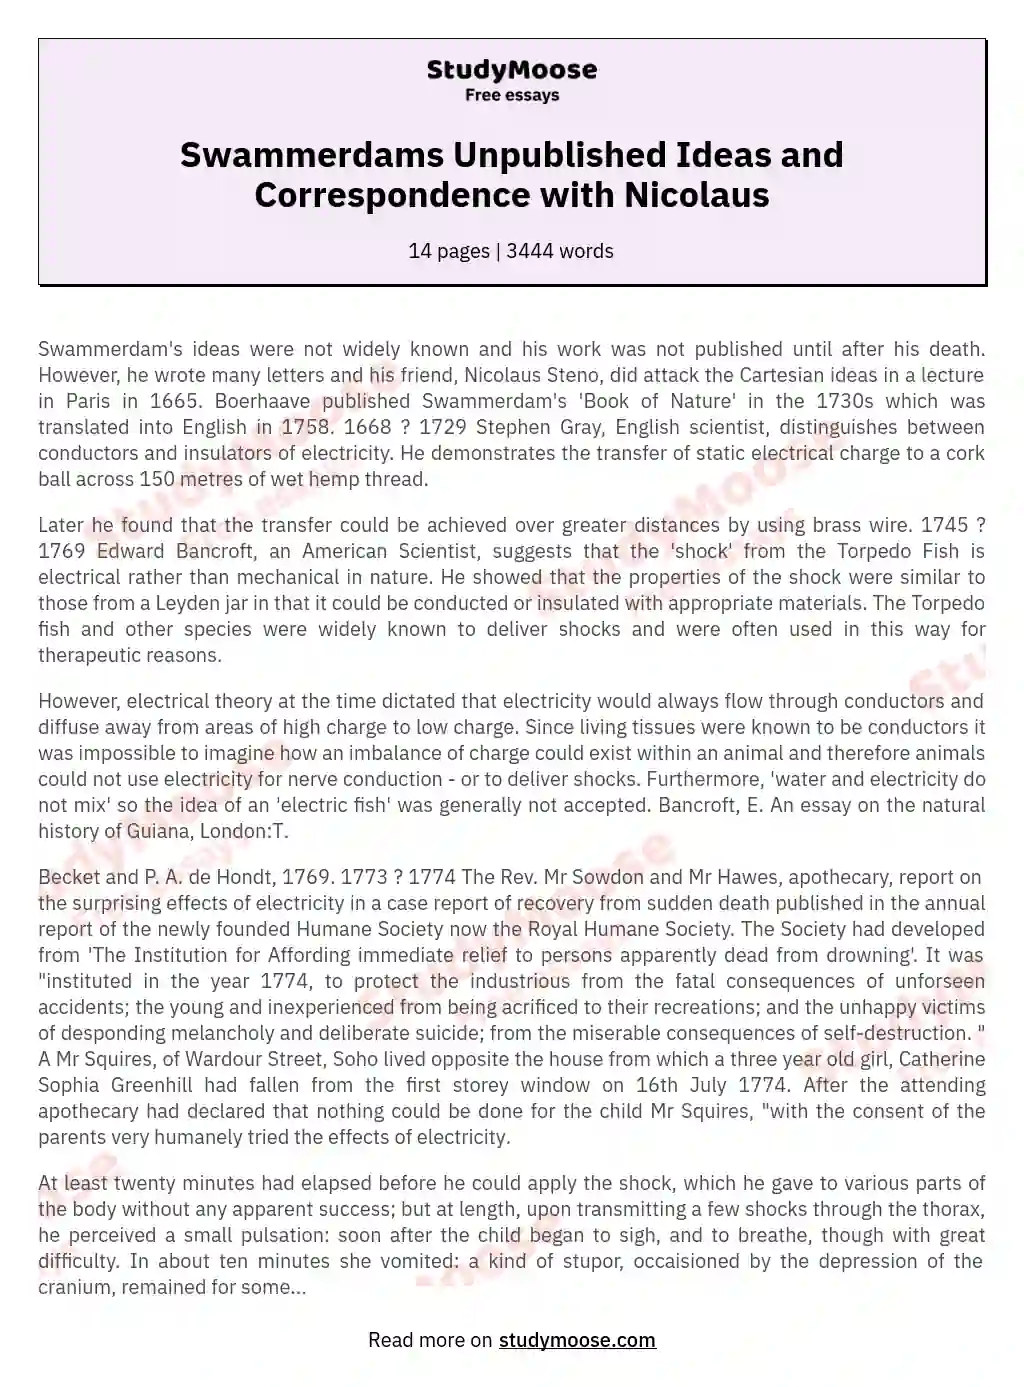 Swammerdams Unpublished Ideas and Correspondence with Nicolaus essay